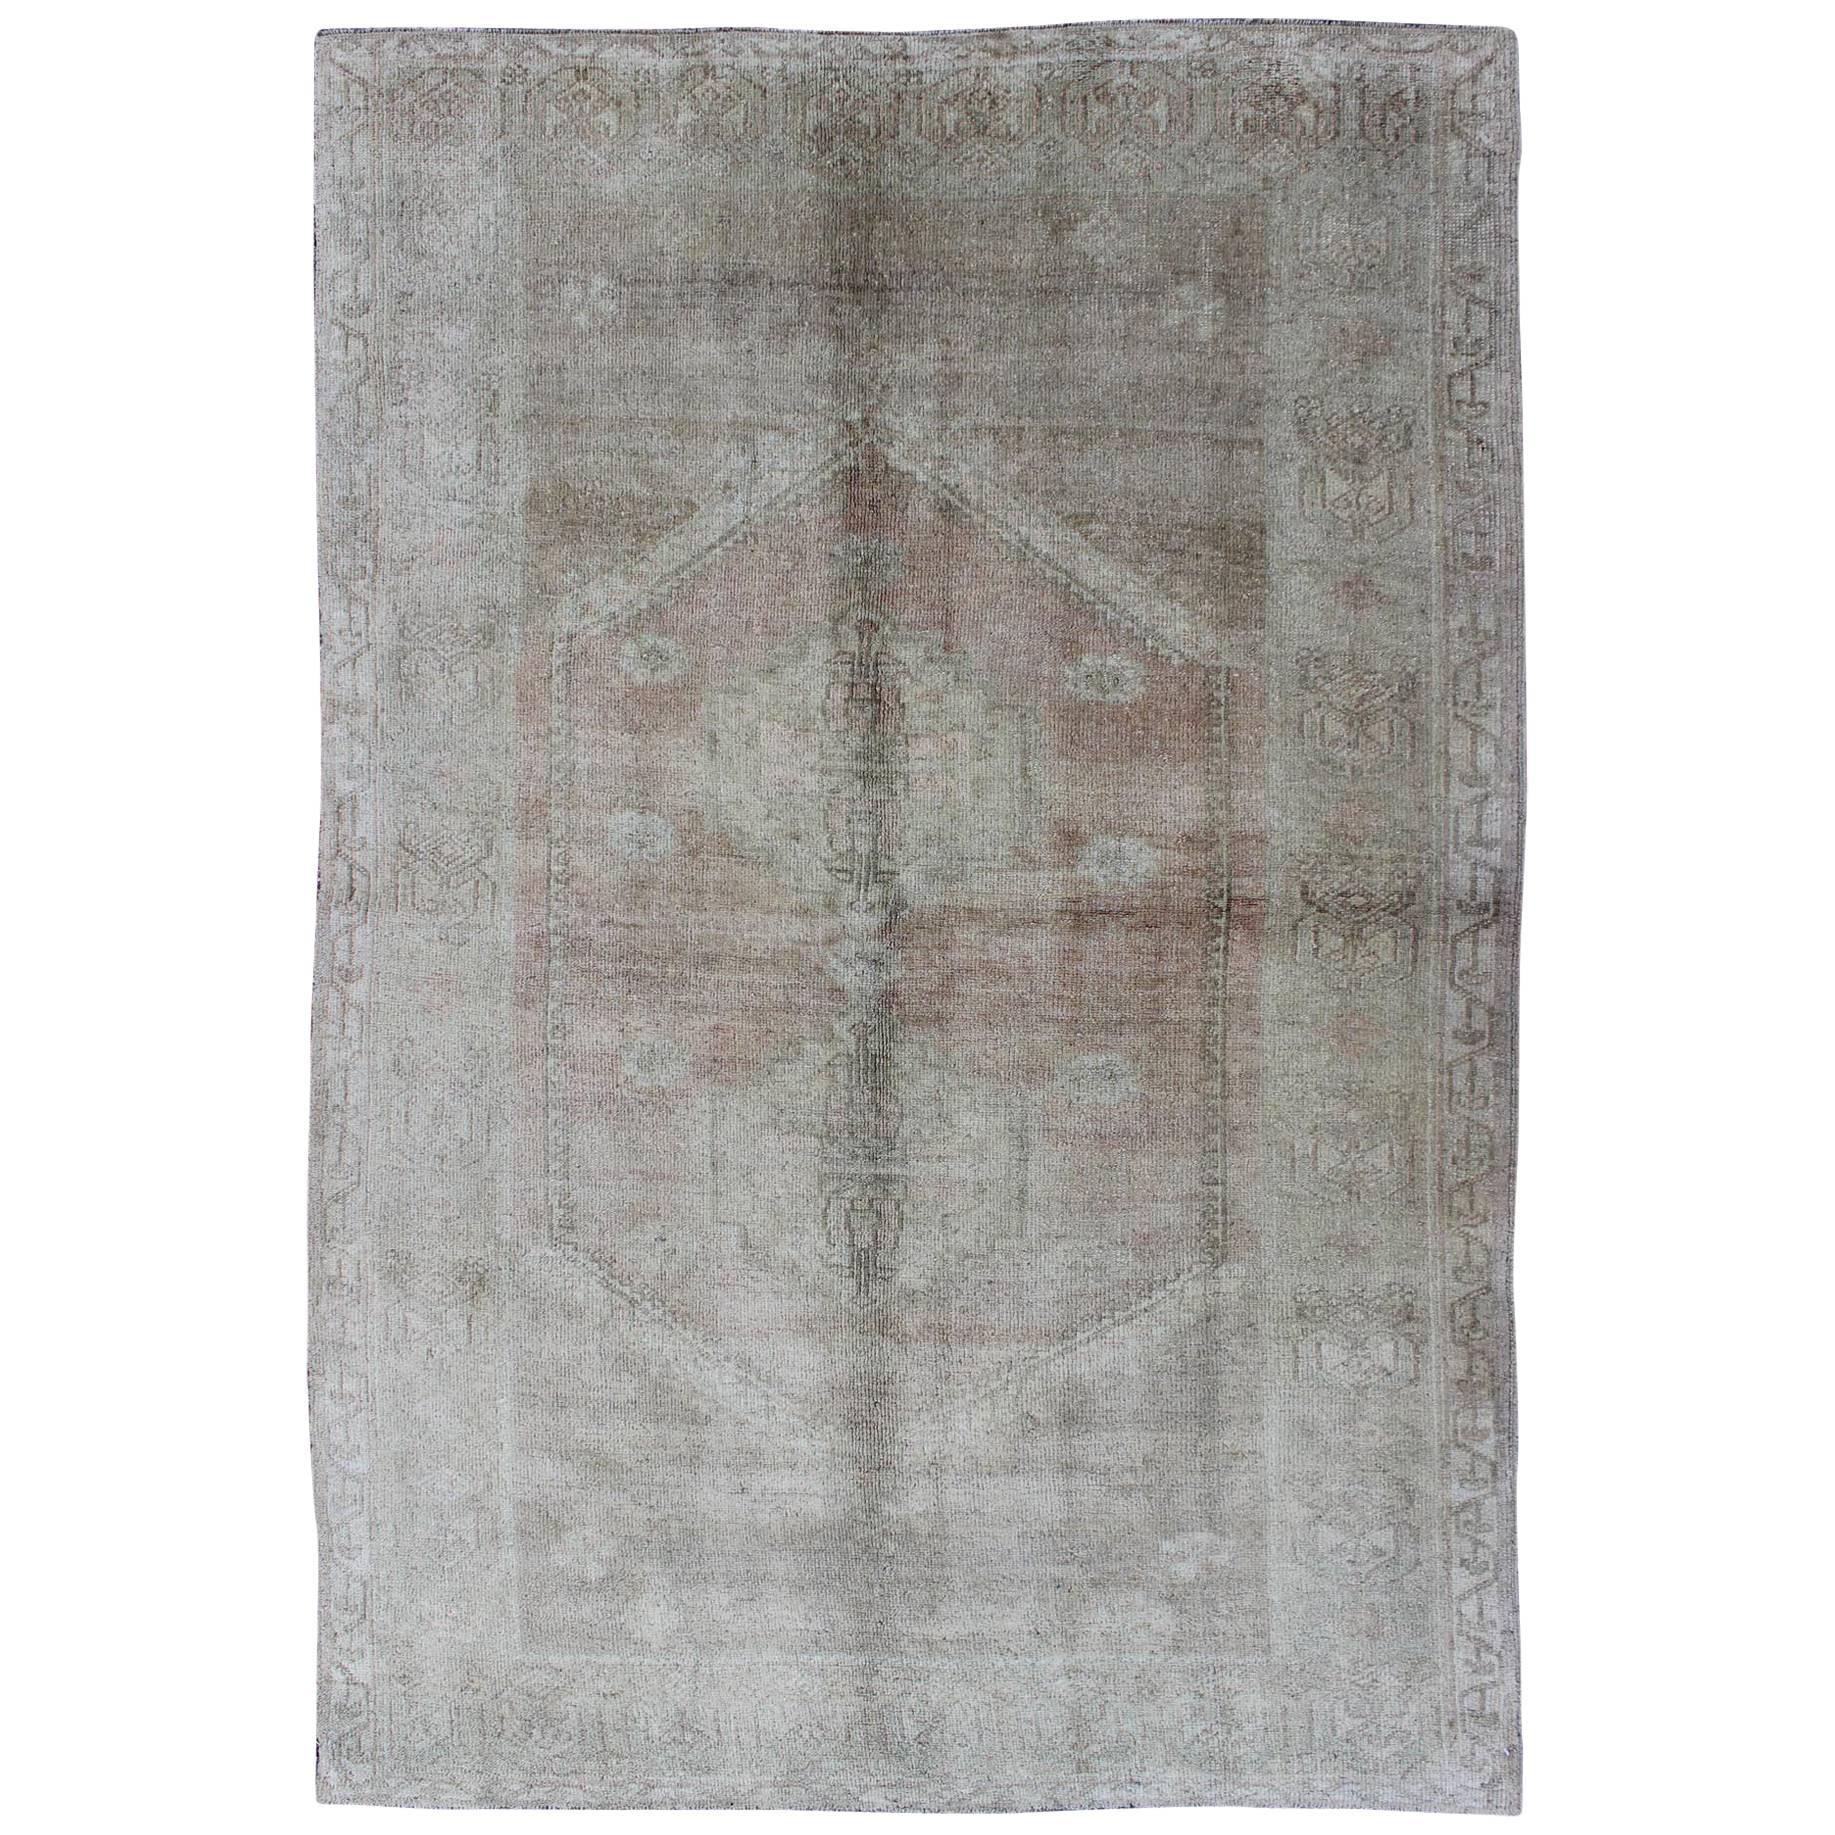 Faded Vintage Turkish Oushak Rug with Central Medallion in Gray and Berry